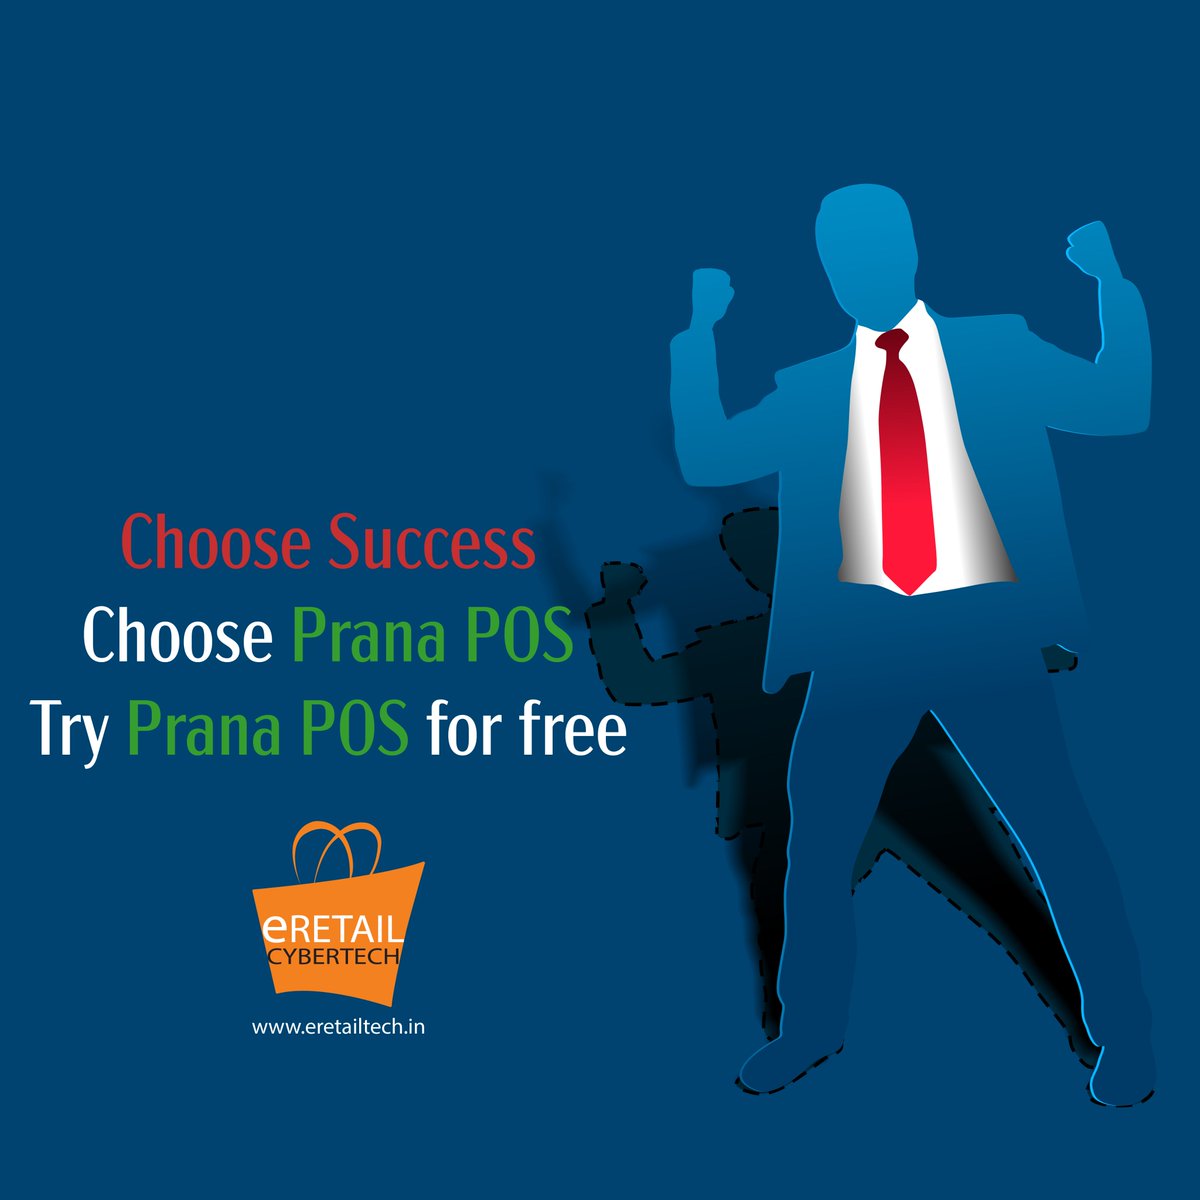 Choose Success. Choose Prana POS. Try Prana POS for free.
Click the Link to Register: eretailtech.in/cloud-point-of…
WhatsApp Enquiry: wa.me/919154242260
#eRetailcyberetchpvt #eRetail #prana #pranabillingsoftware #pos #pointofsale #cloudpos #cloudpointofsale #cloudbillingsoftware